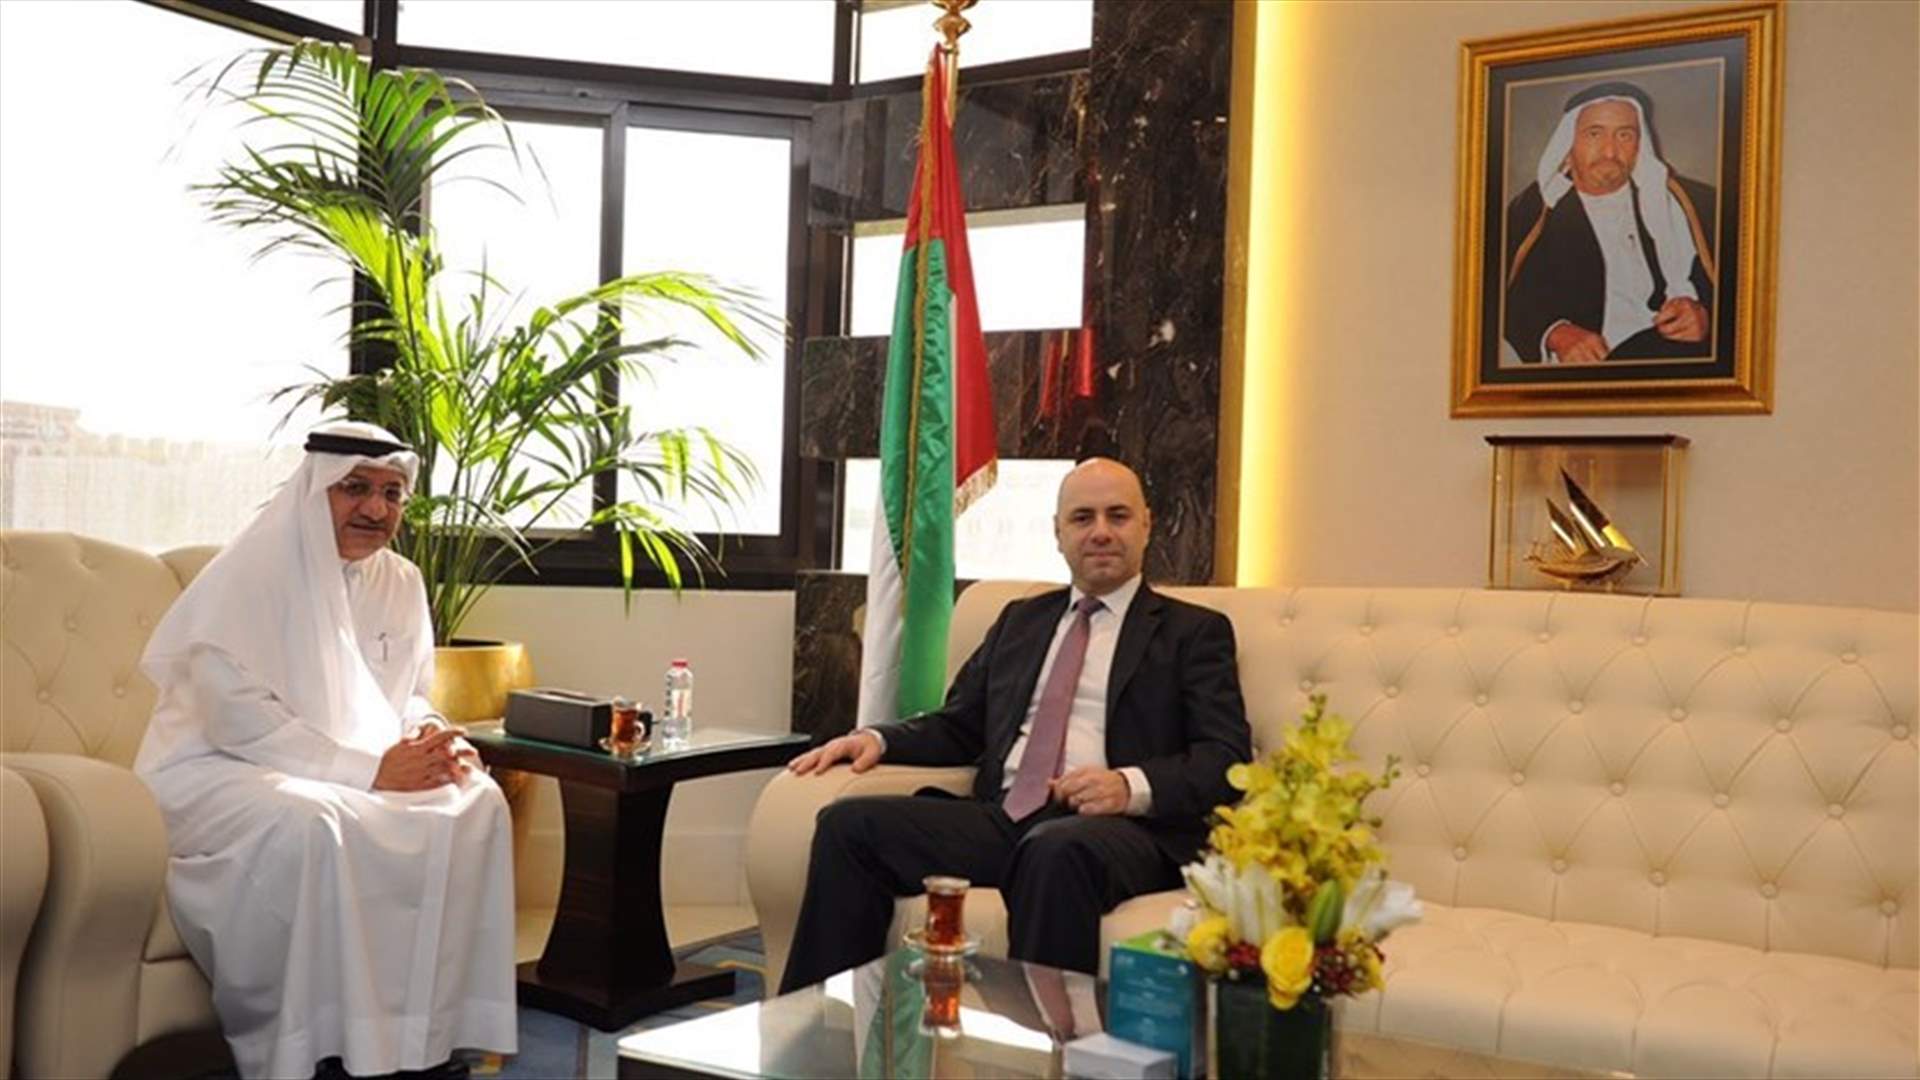 Health Minister Hasbani takes part in the Arab Health Exhibition and Congress in Dubai